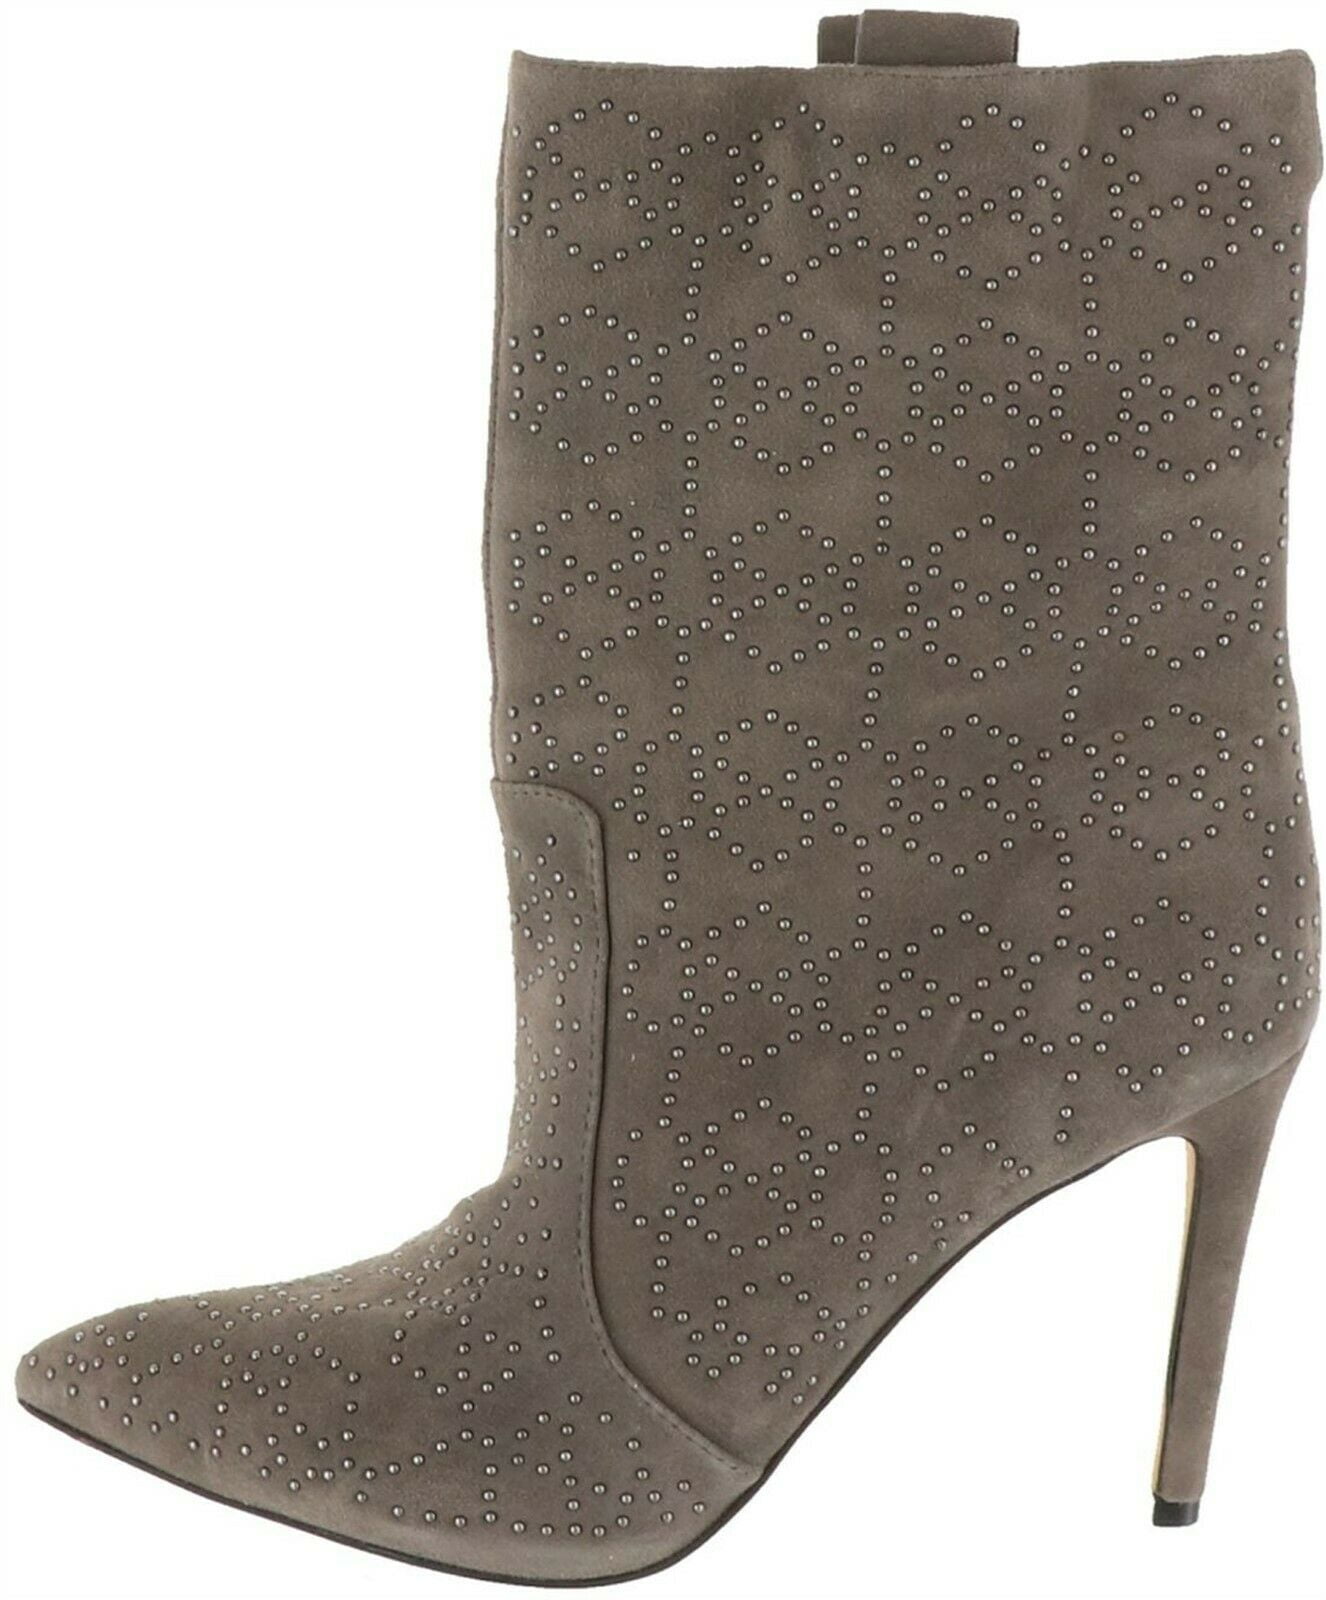 Vince Camuto Suede Mid-Calf Boots 